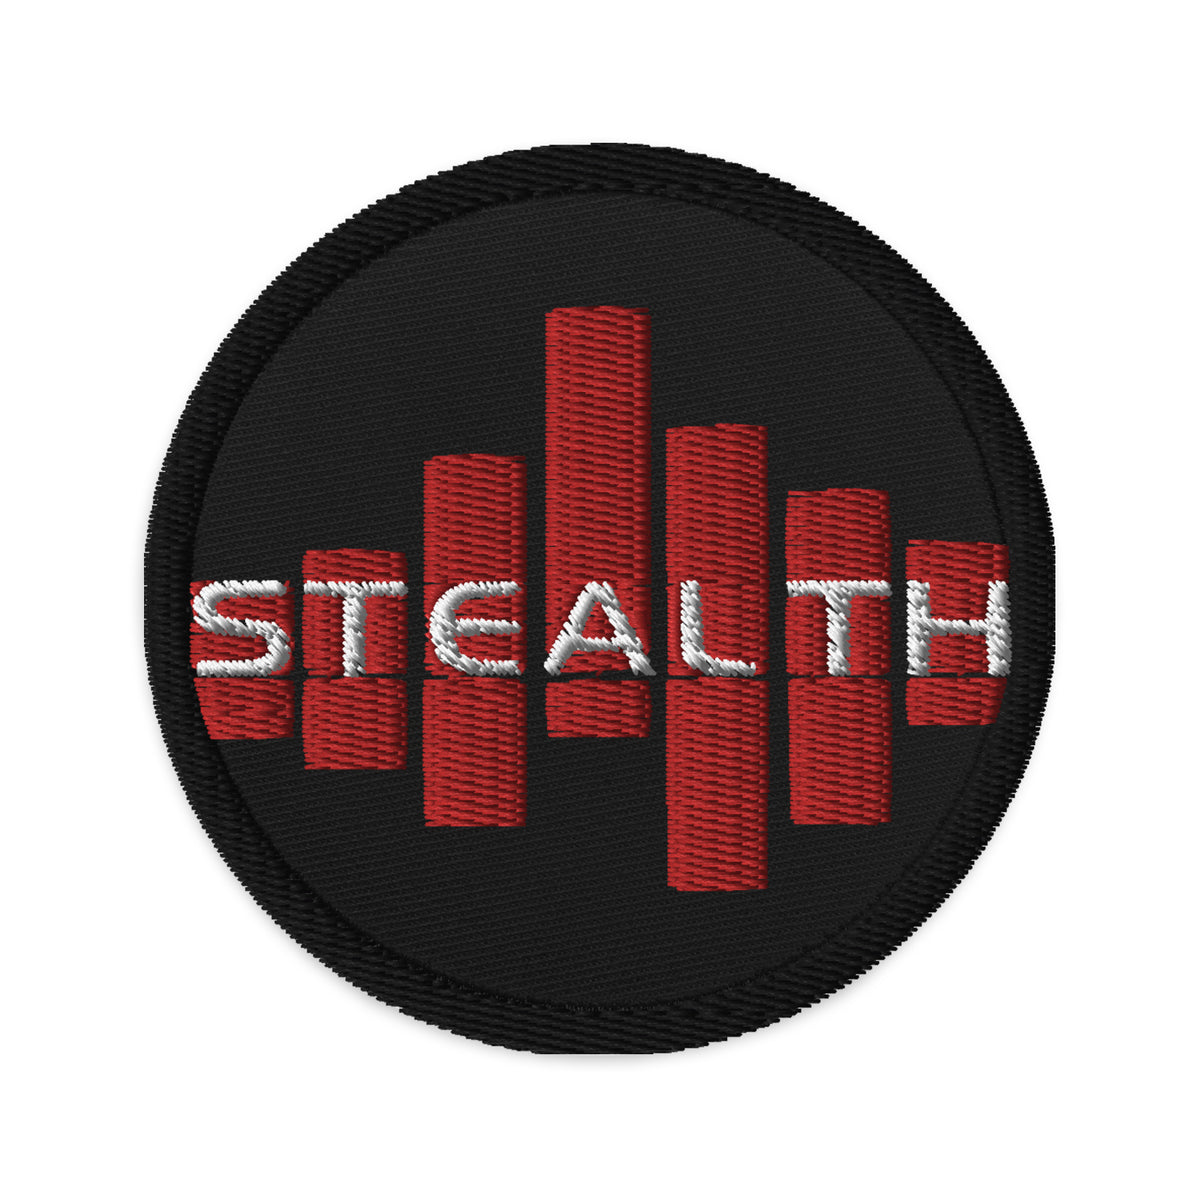 Stealth Chairs Embroidered patches